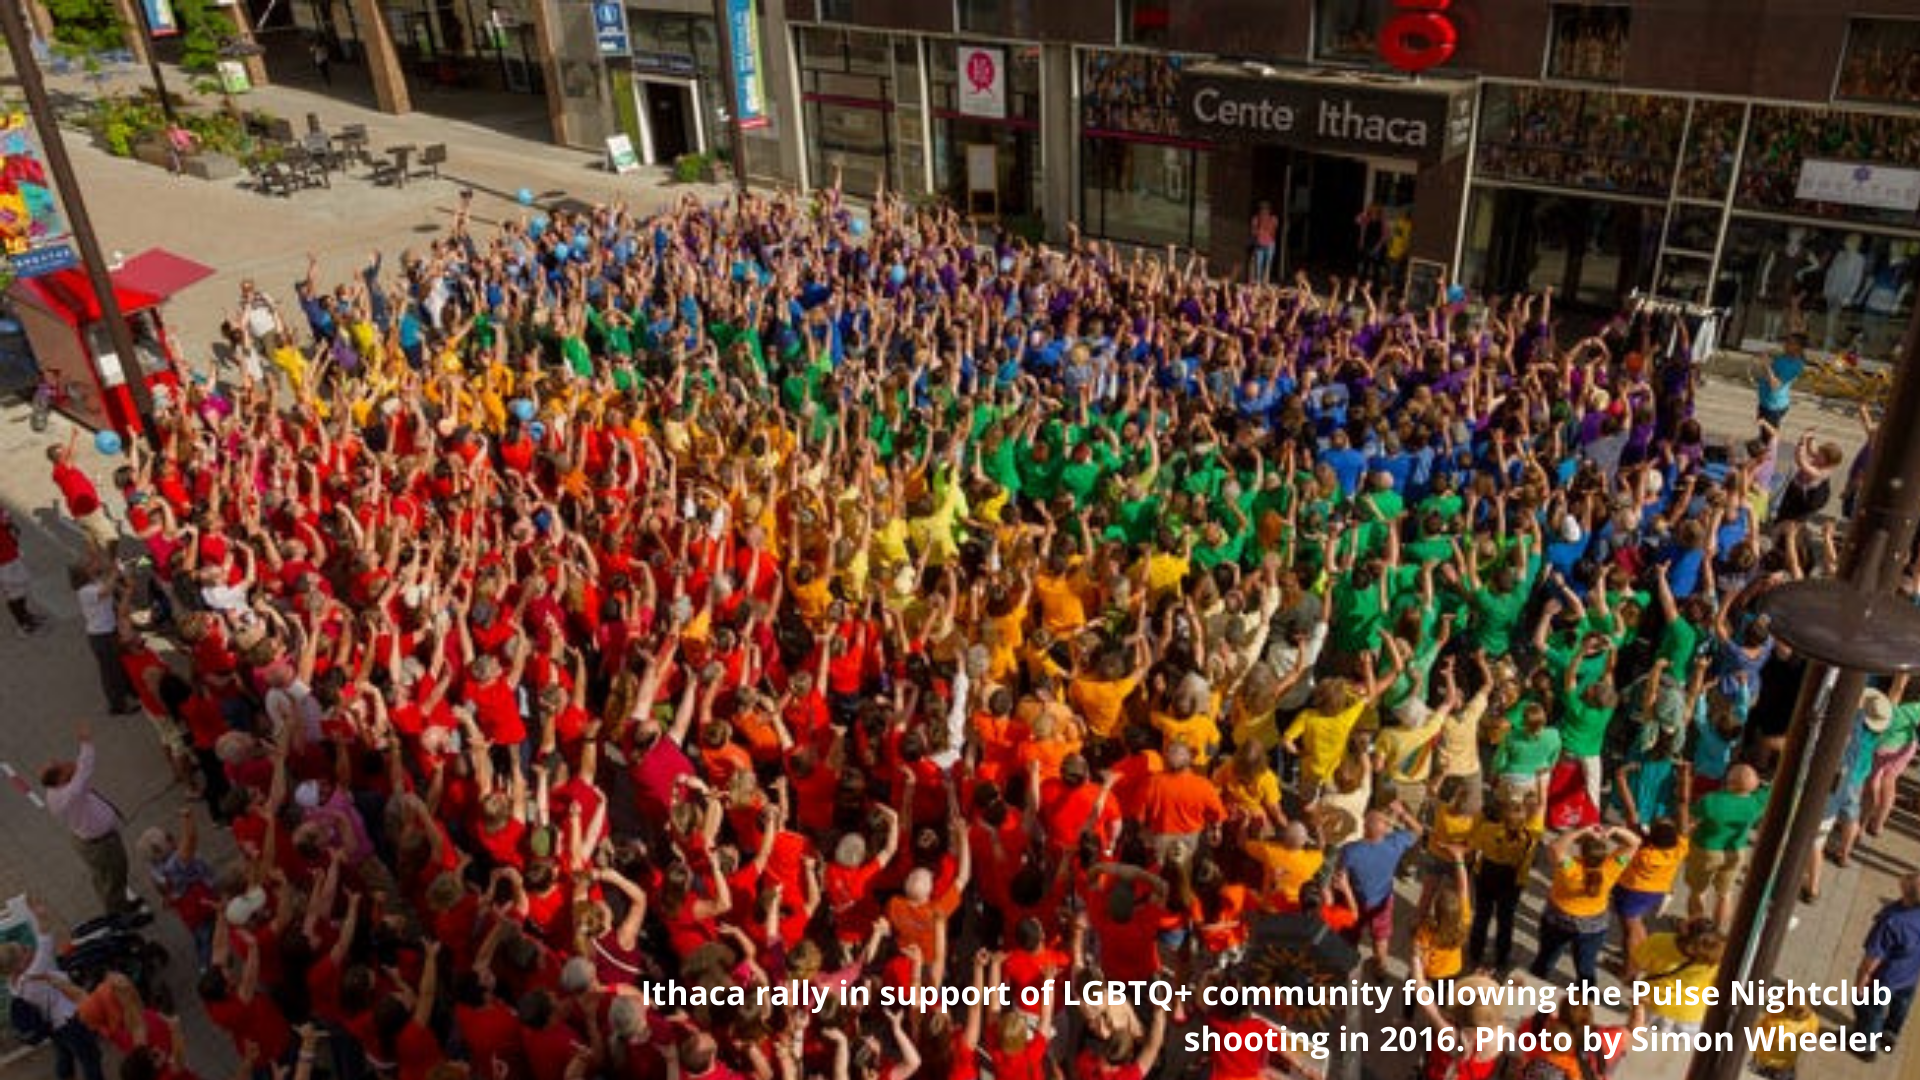 An image of a large crowd wearing red, orange, yellow, green, blue and purple shirts to make a rainbow. The caption says "Ithaca rally support of LGBTQ+ community following the Pulse Nightclub shooting in 2018. Photo by Simon Wheeler."